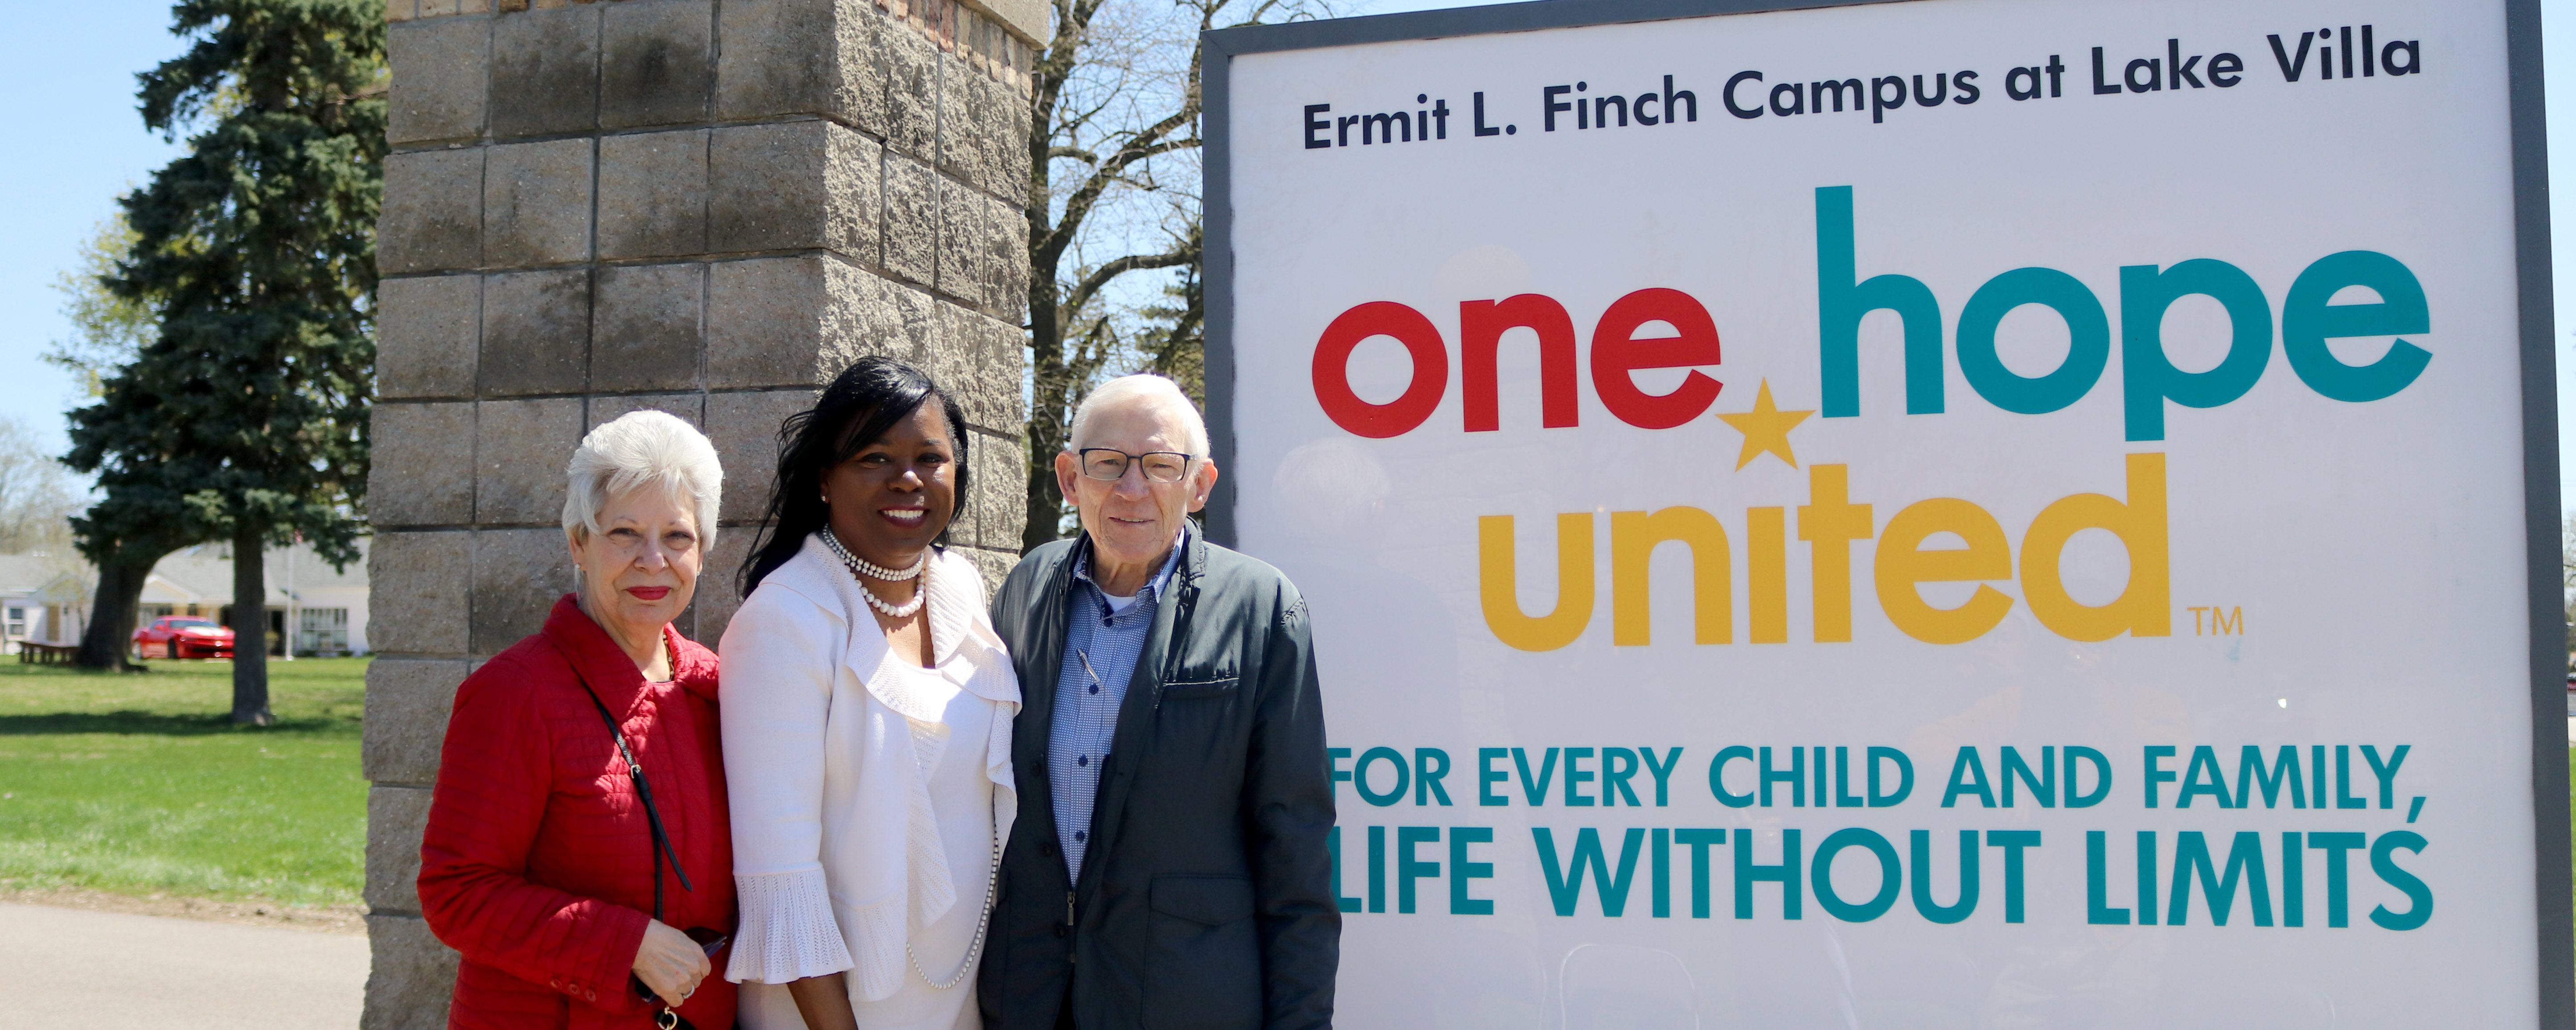 One Hope United Names Lake Villa Campus for Ermit L. Finch